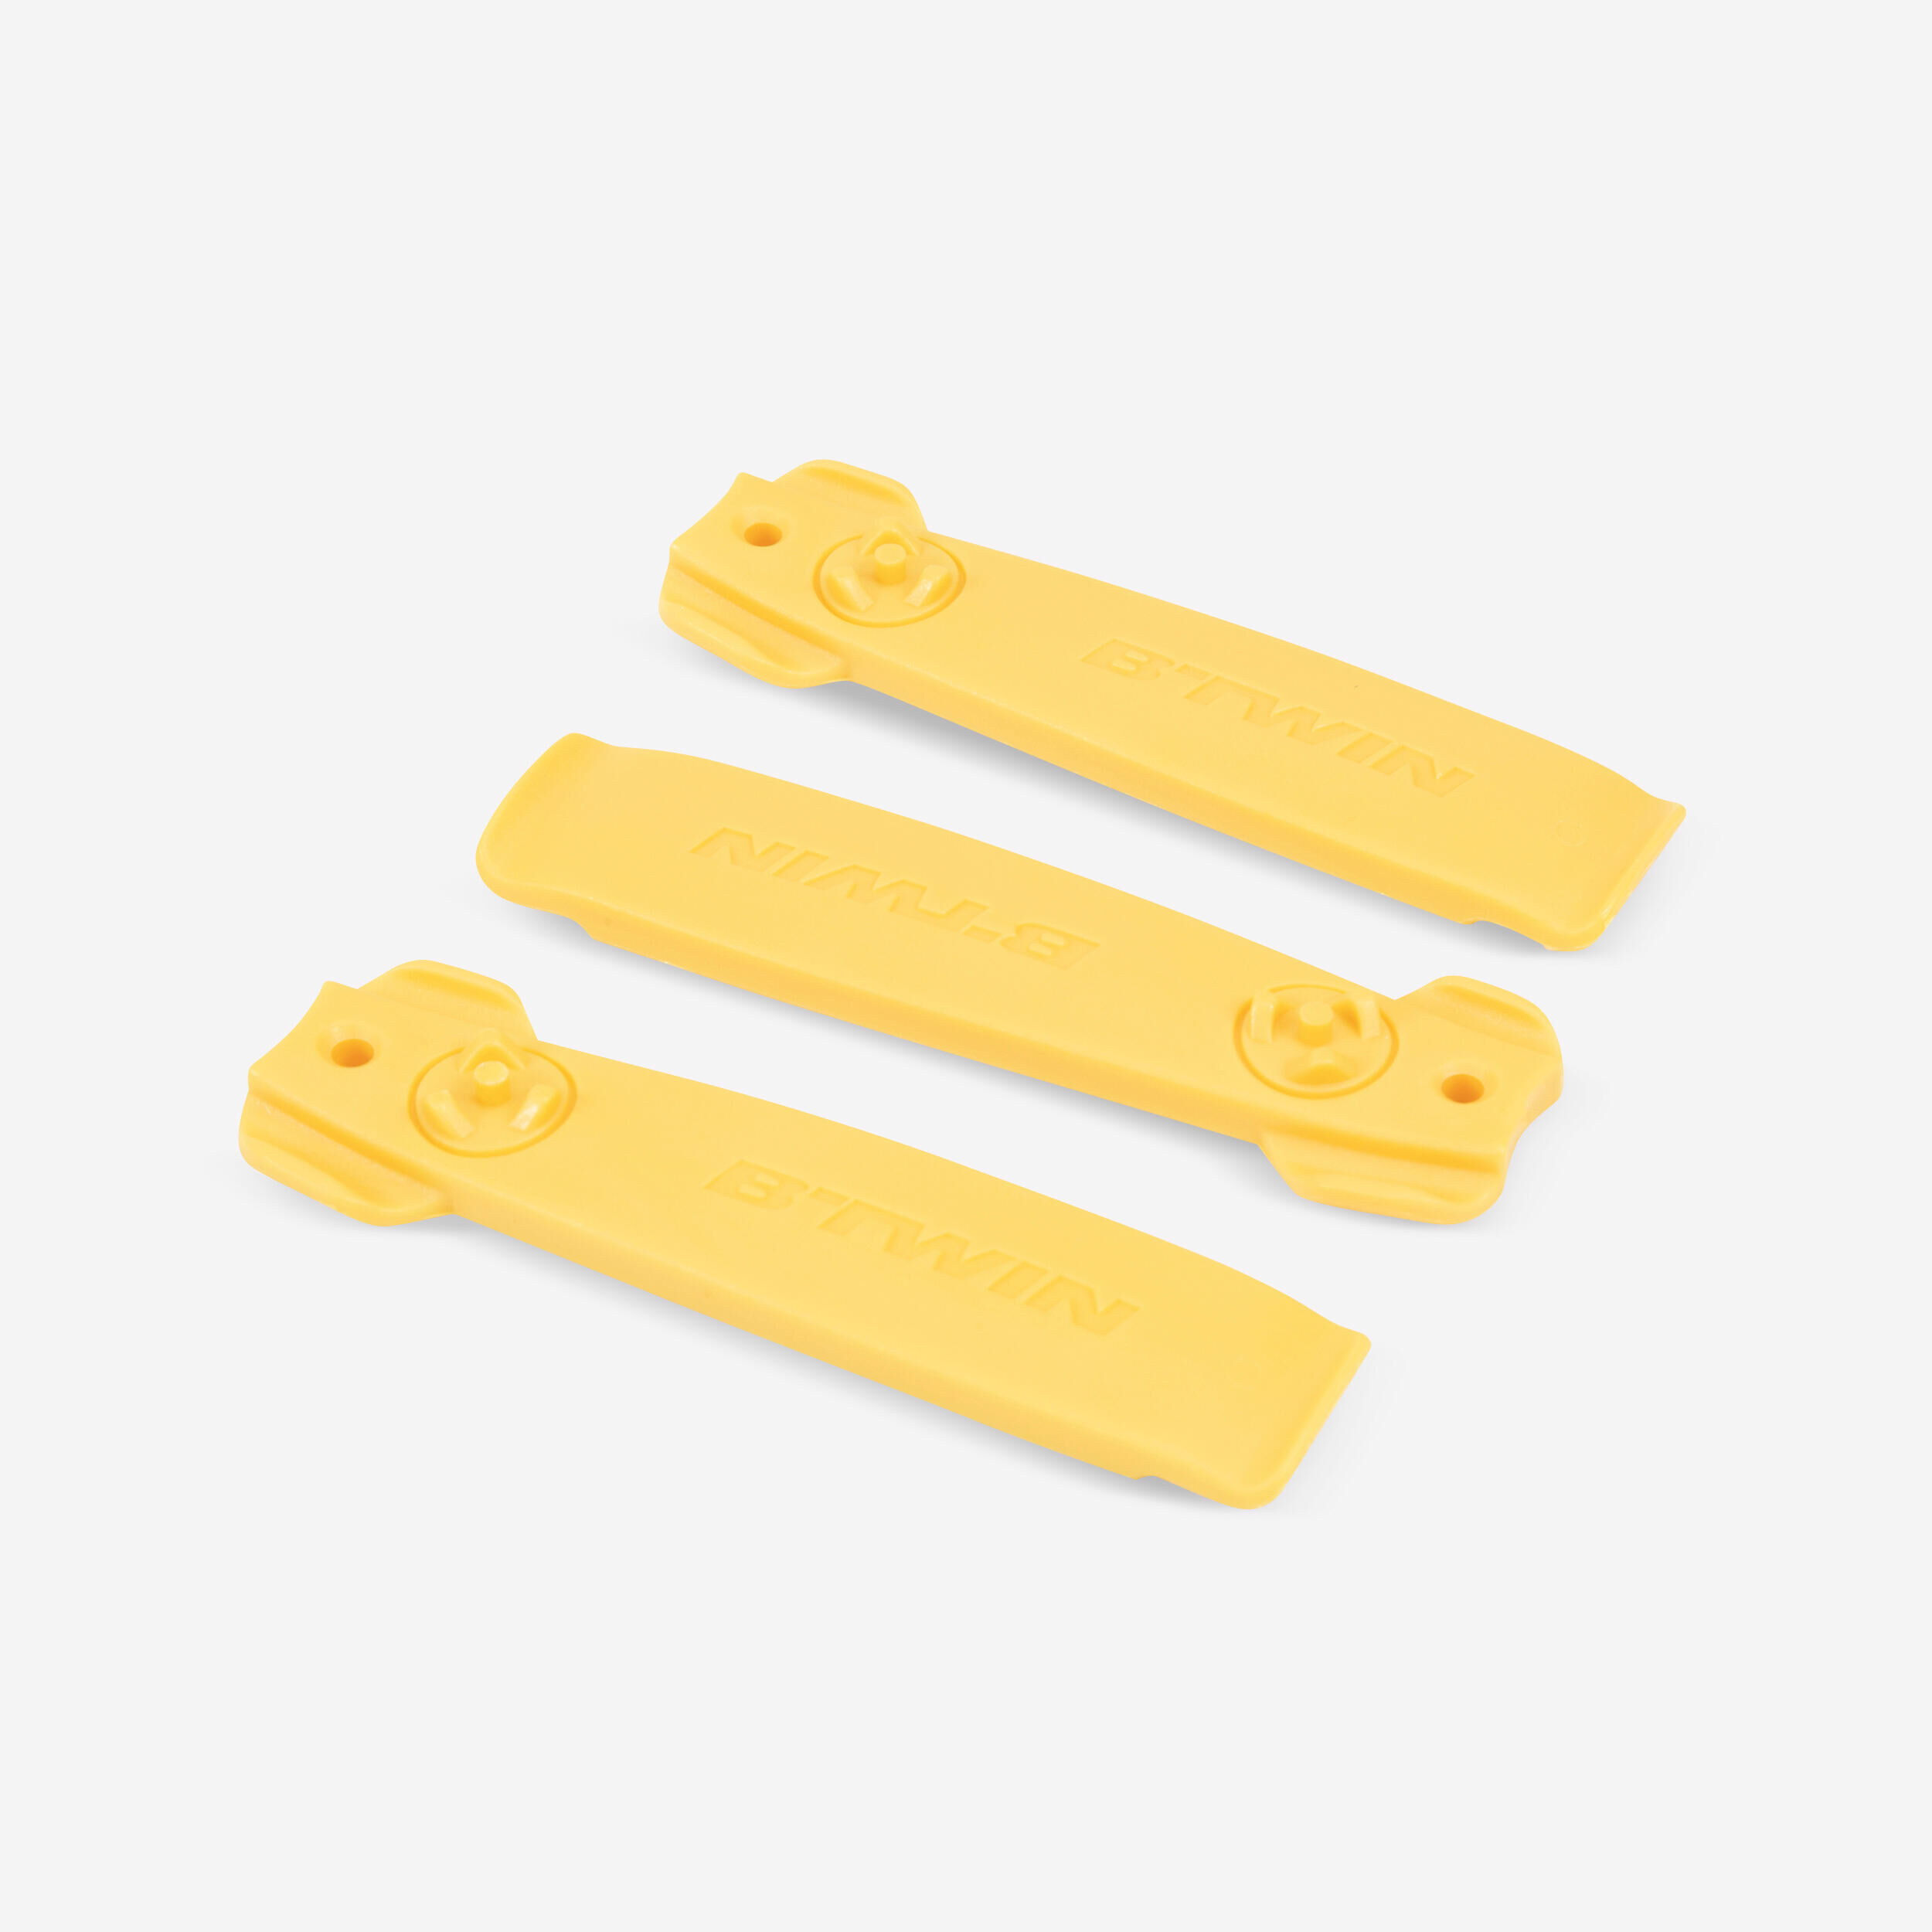 DECATHLON Pack of 3 Tyre Levers - Yellow